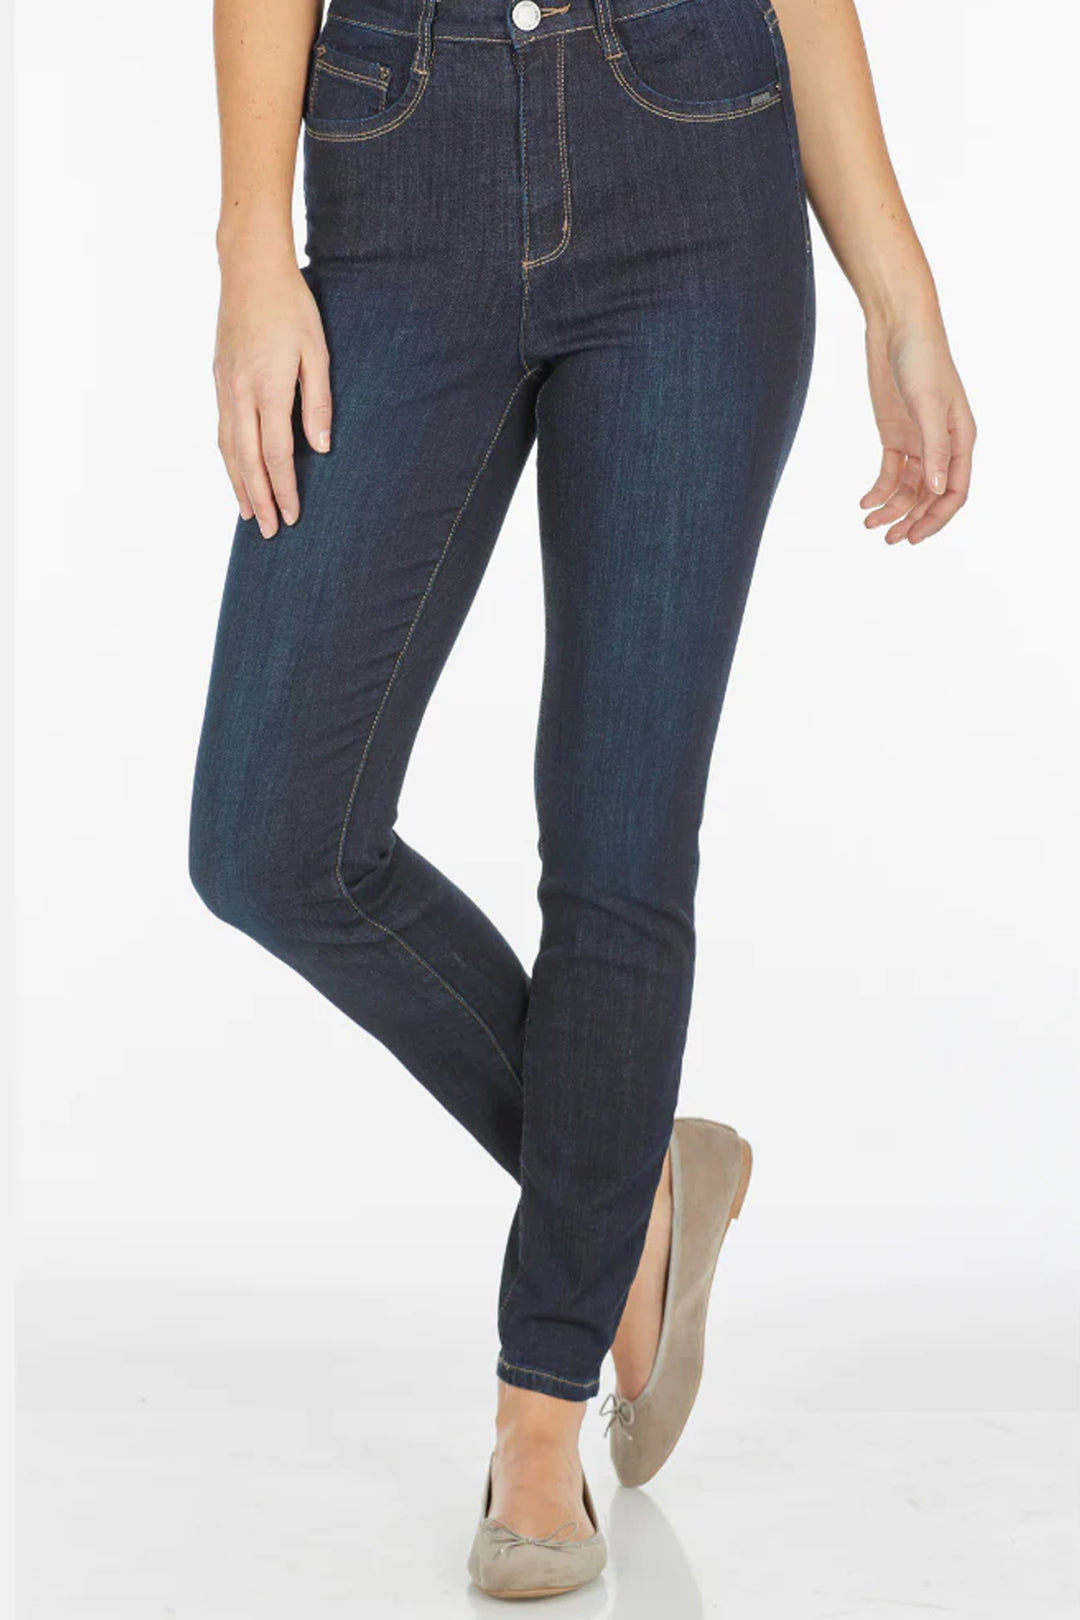 Featuring COOLMAX fabric, this high-rise jean offers a slim and flattering fit with a five-pocket design.